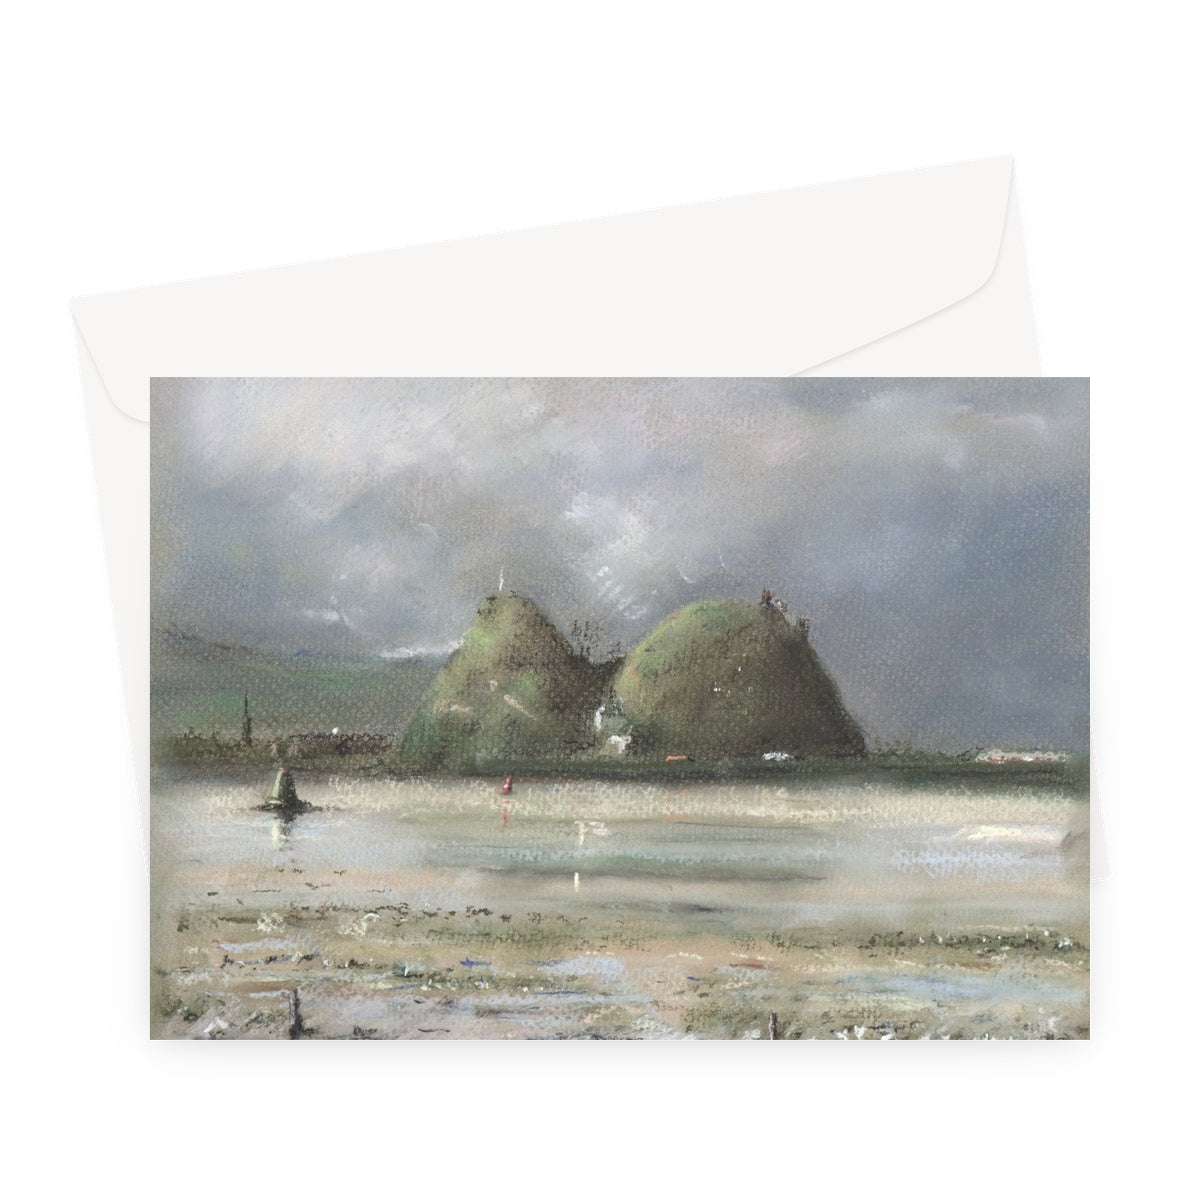 Dumbarton Rock Art Gifts Greeting Card-Stationery-River Clyde Art Gallery-A5 Landscape-1 Card-Paintings, Prints, Homeware, Art Gifts From Scotland By Scottish Artist Kevin Hunter